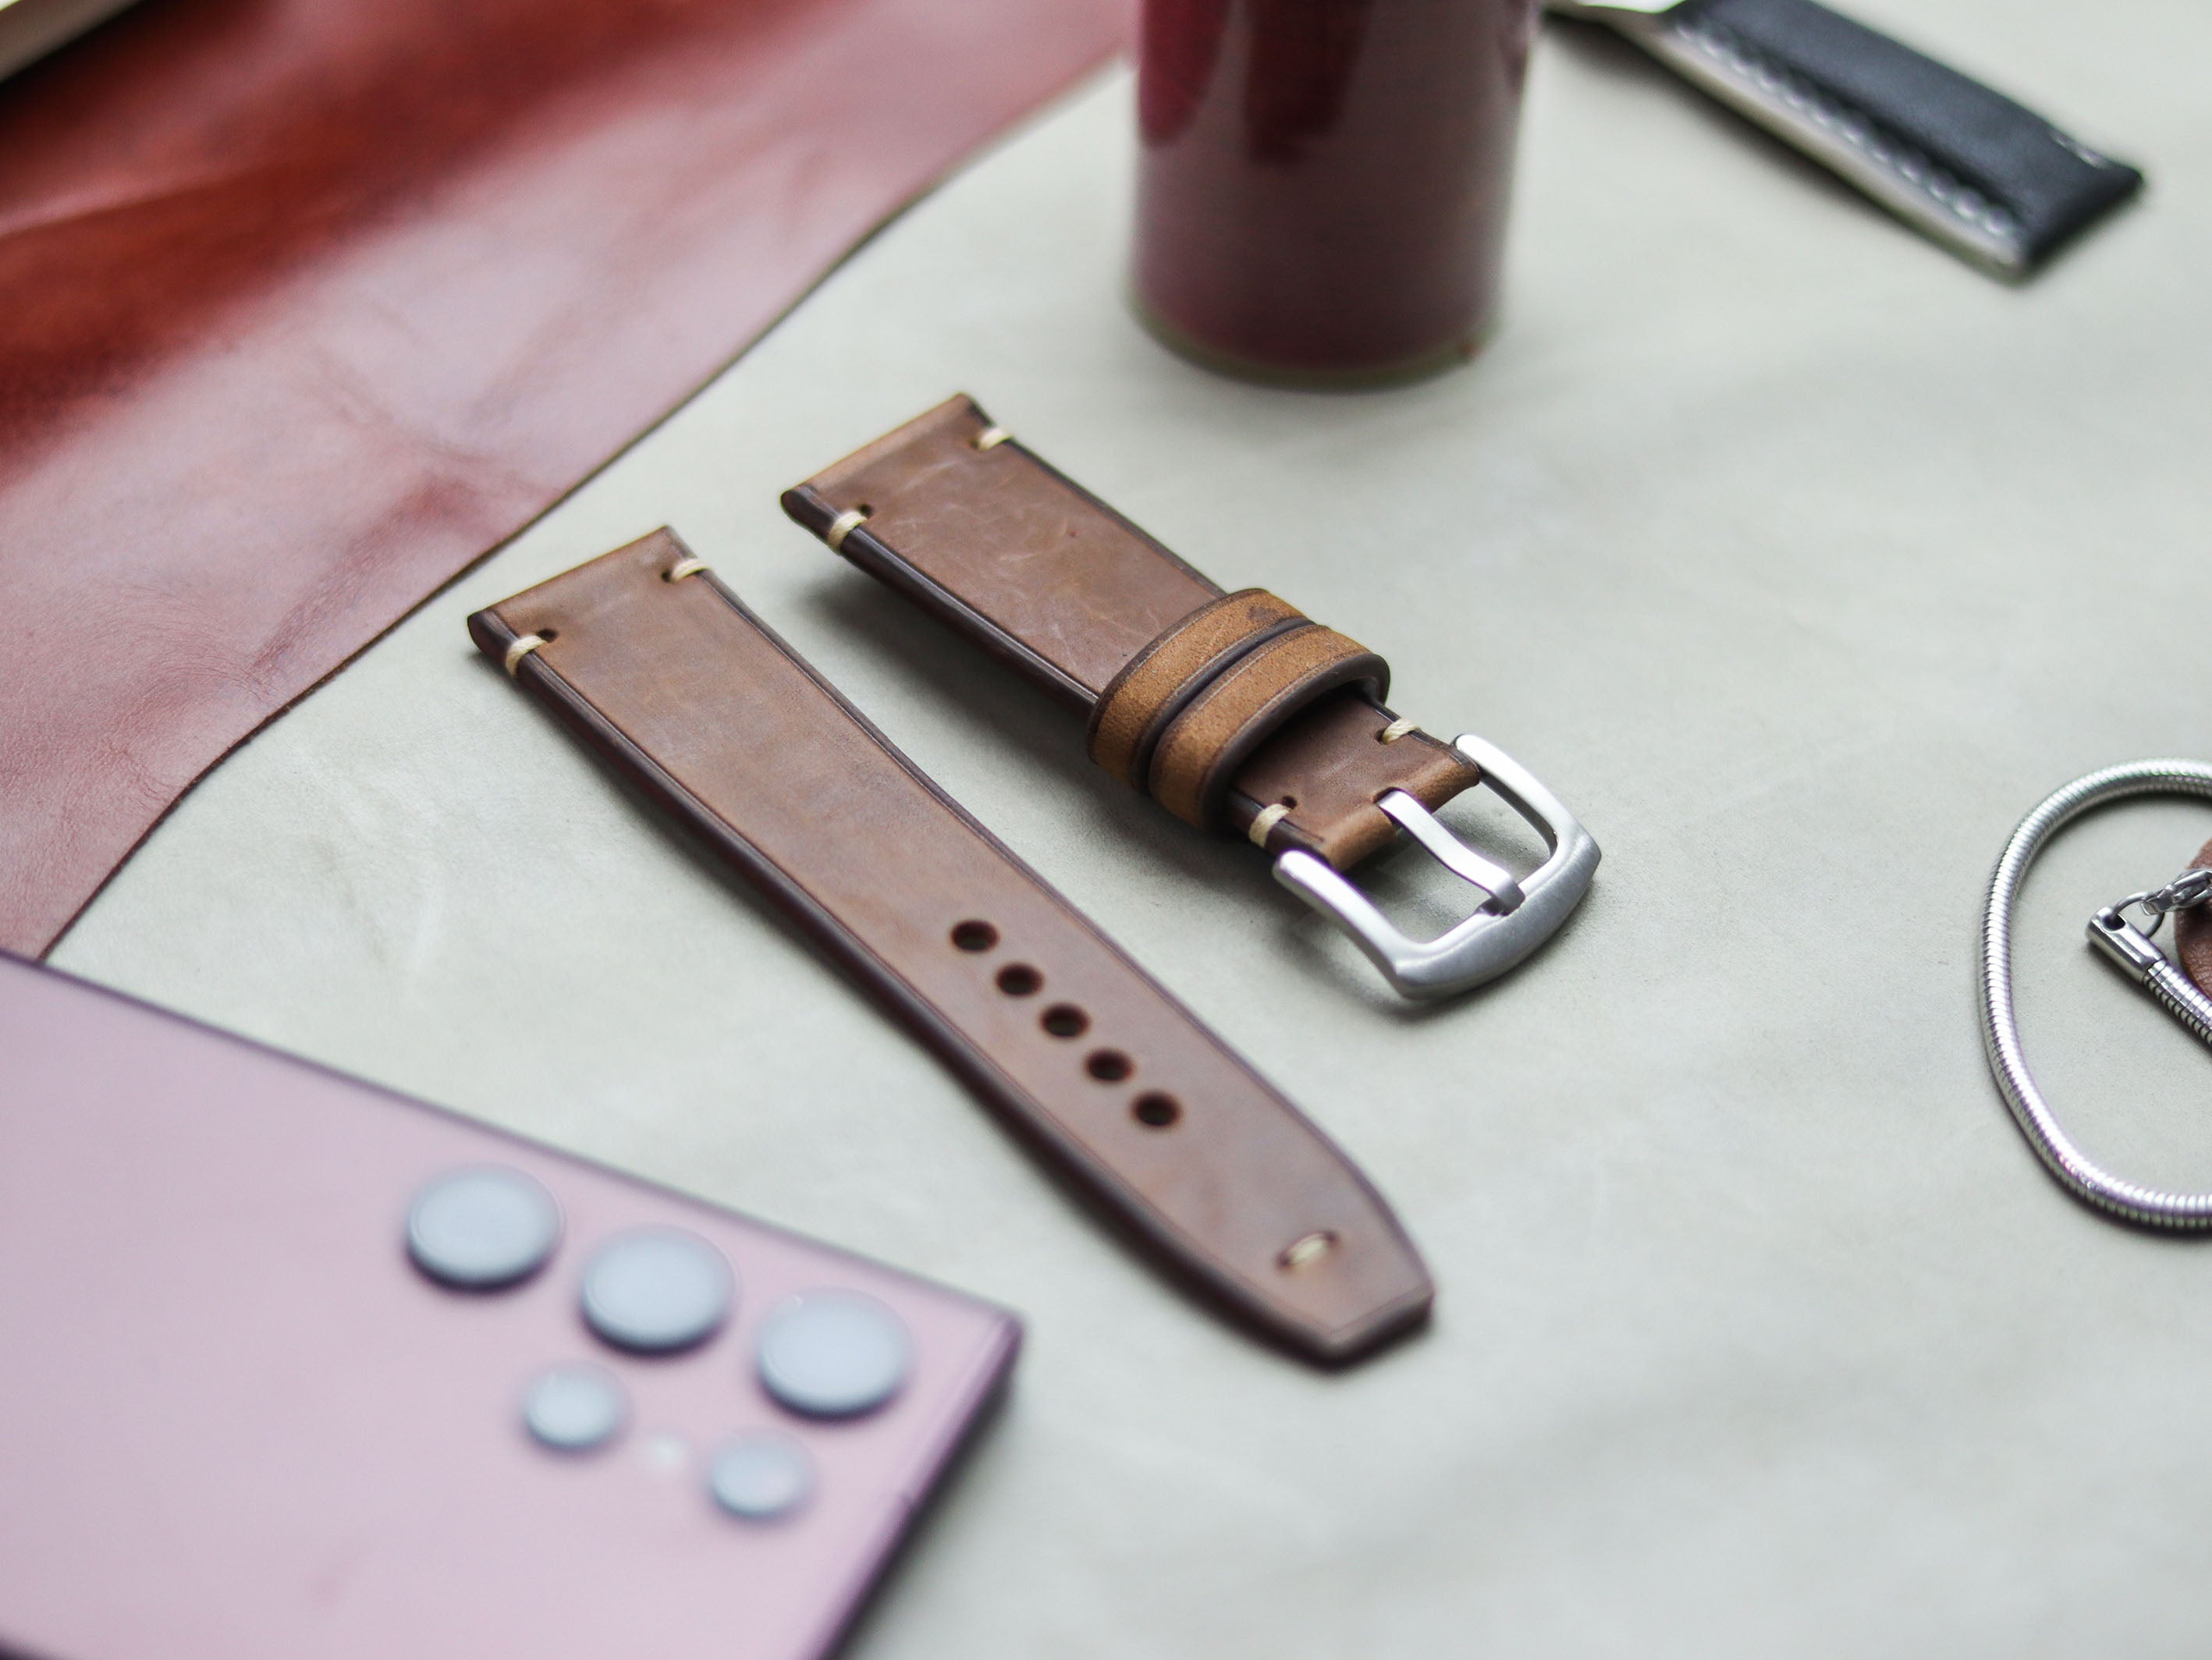 RUSTY BROWN HAND-CRAFTED WATCH STRAPS - MINIMAL STITCHED